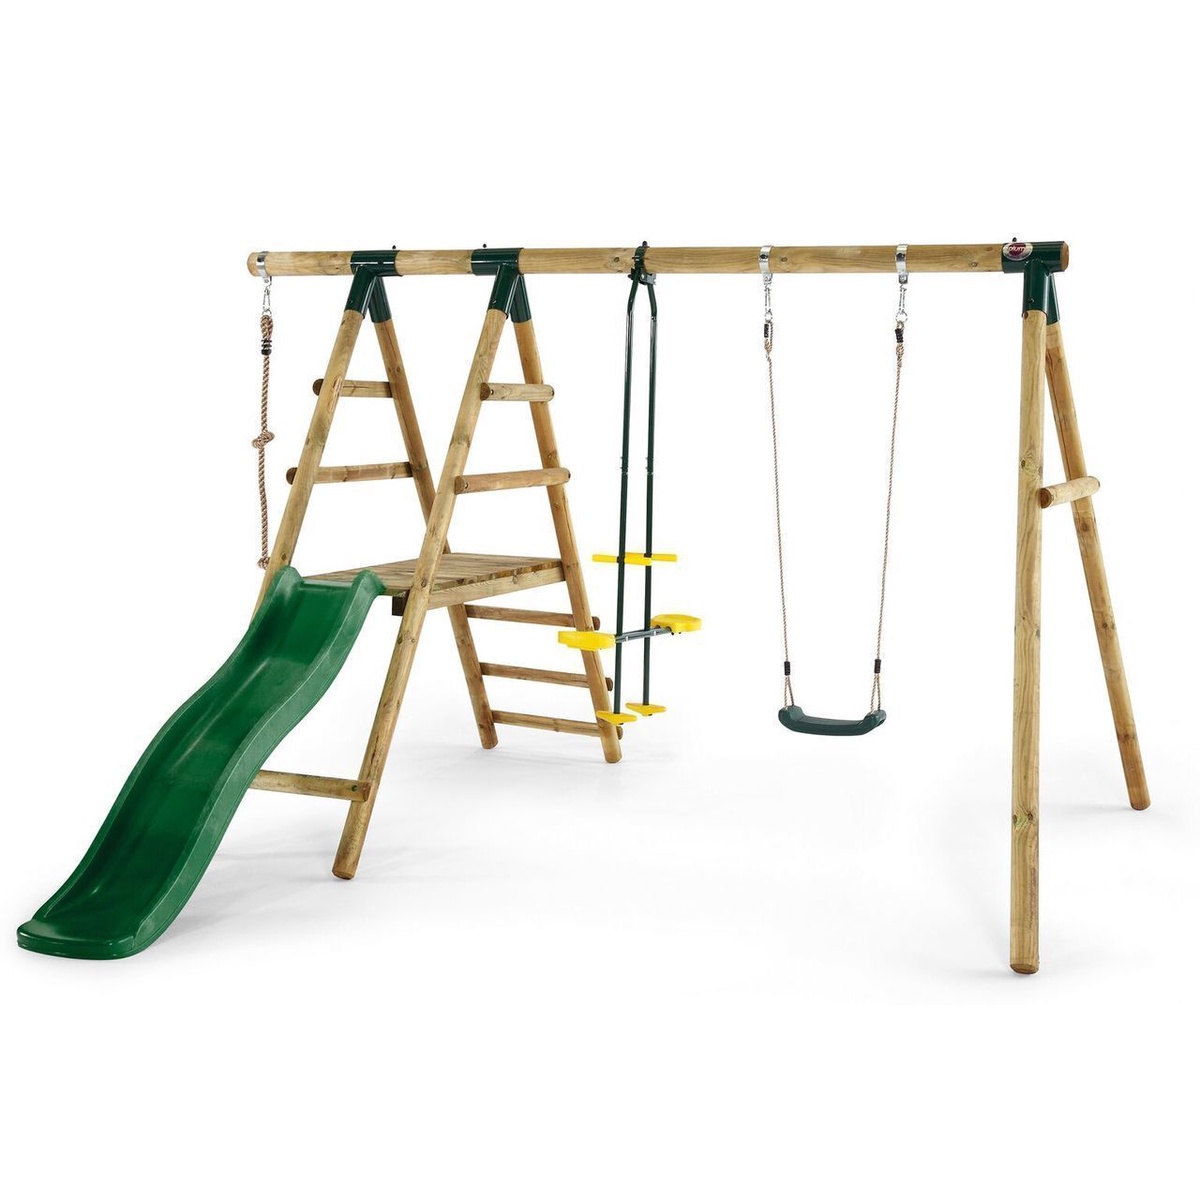 General features and attributes of an indoor swing set